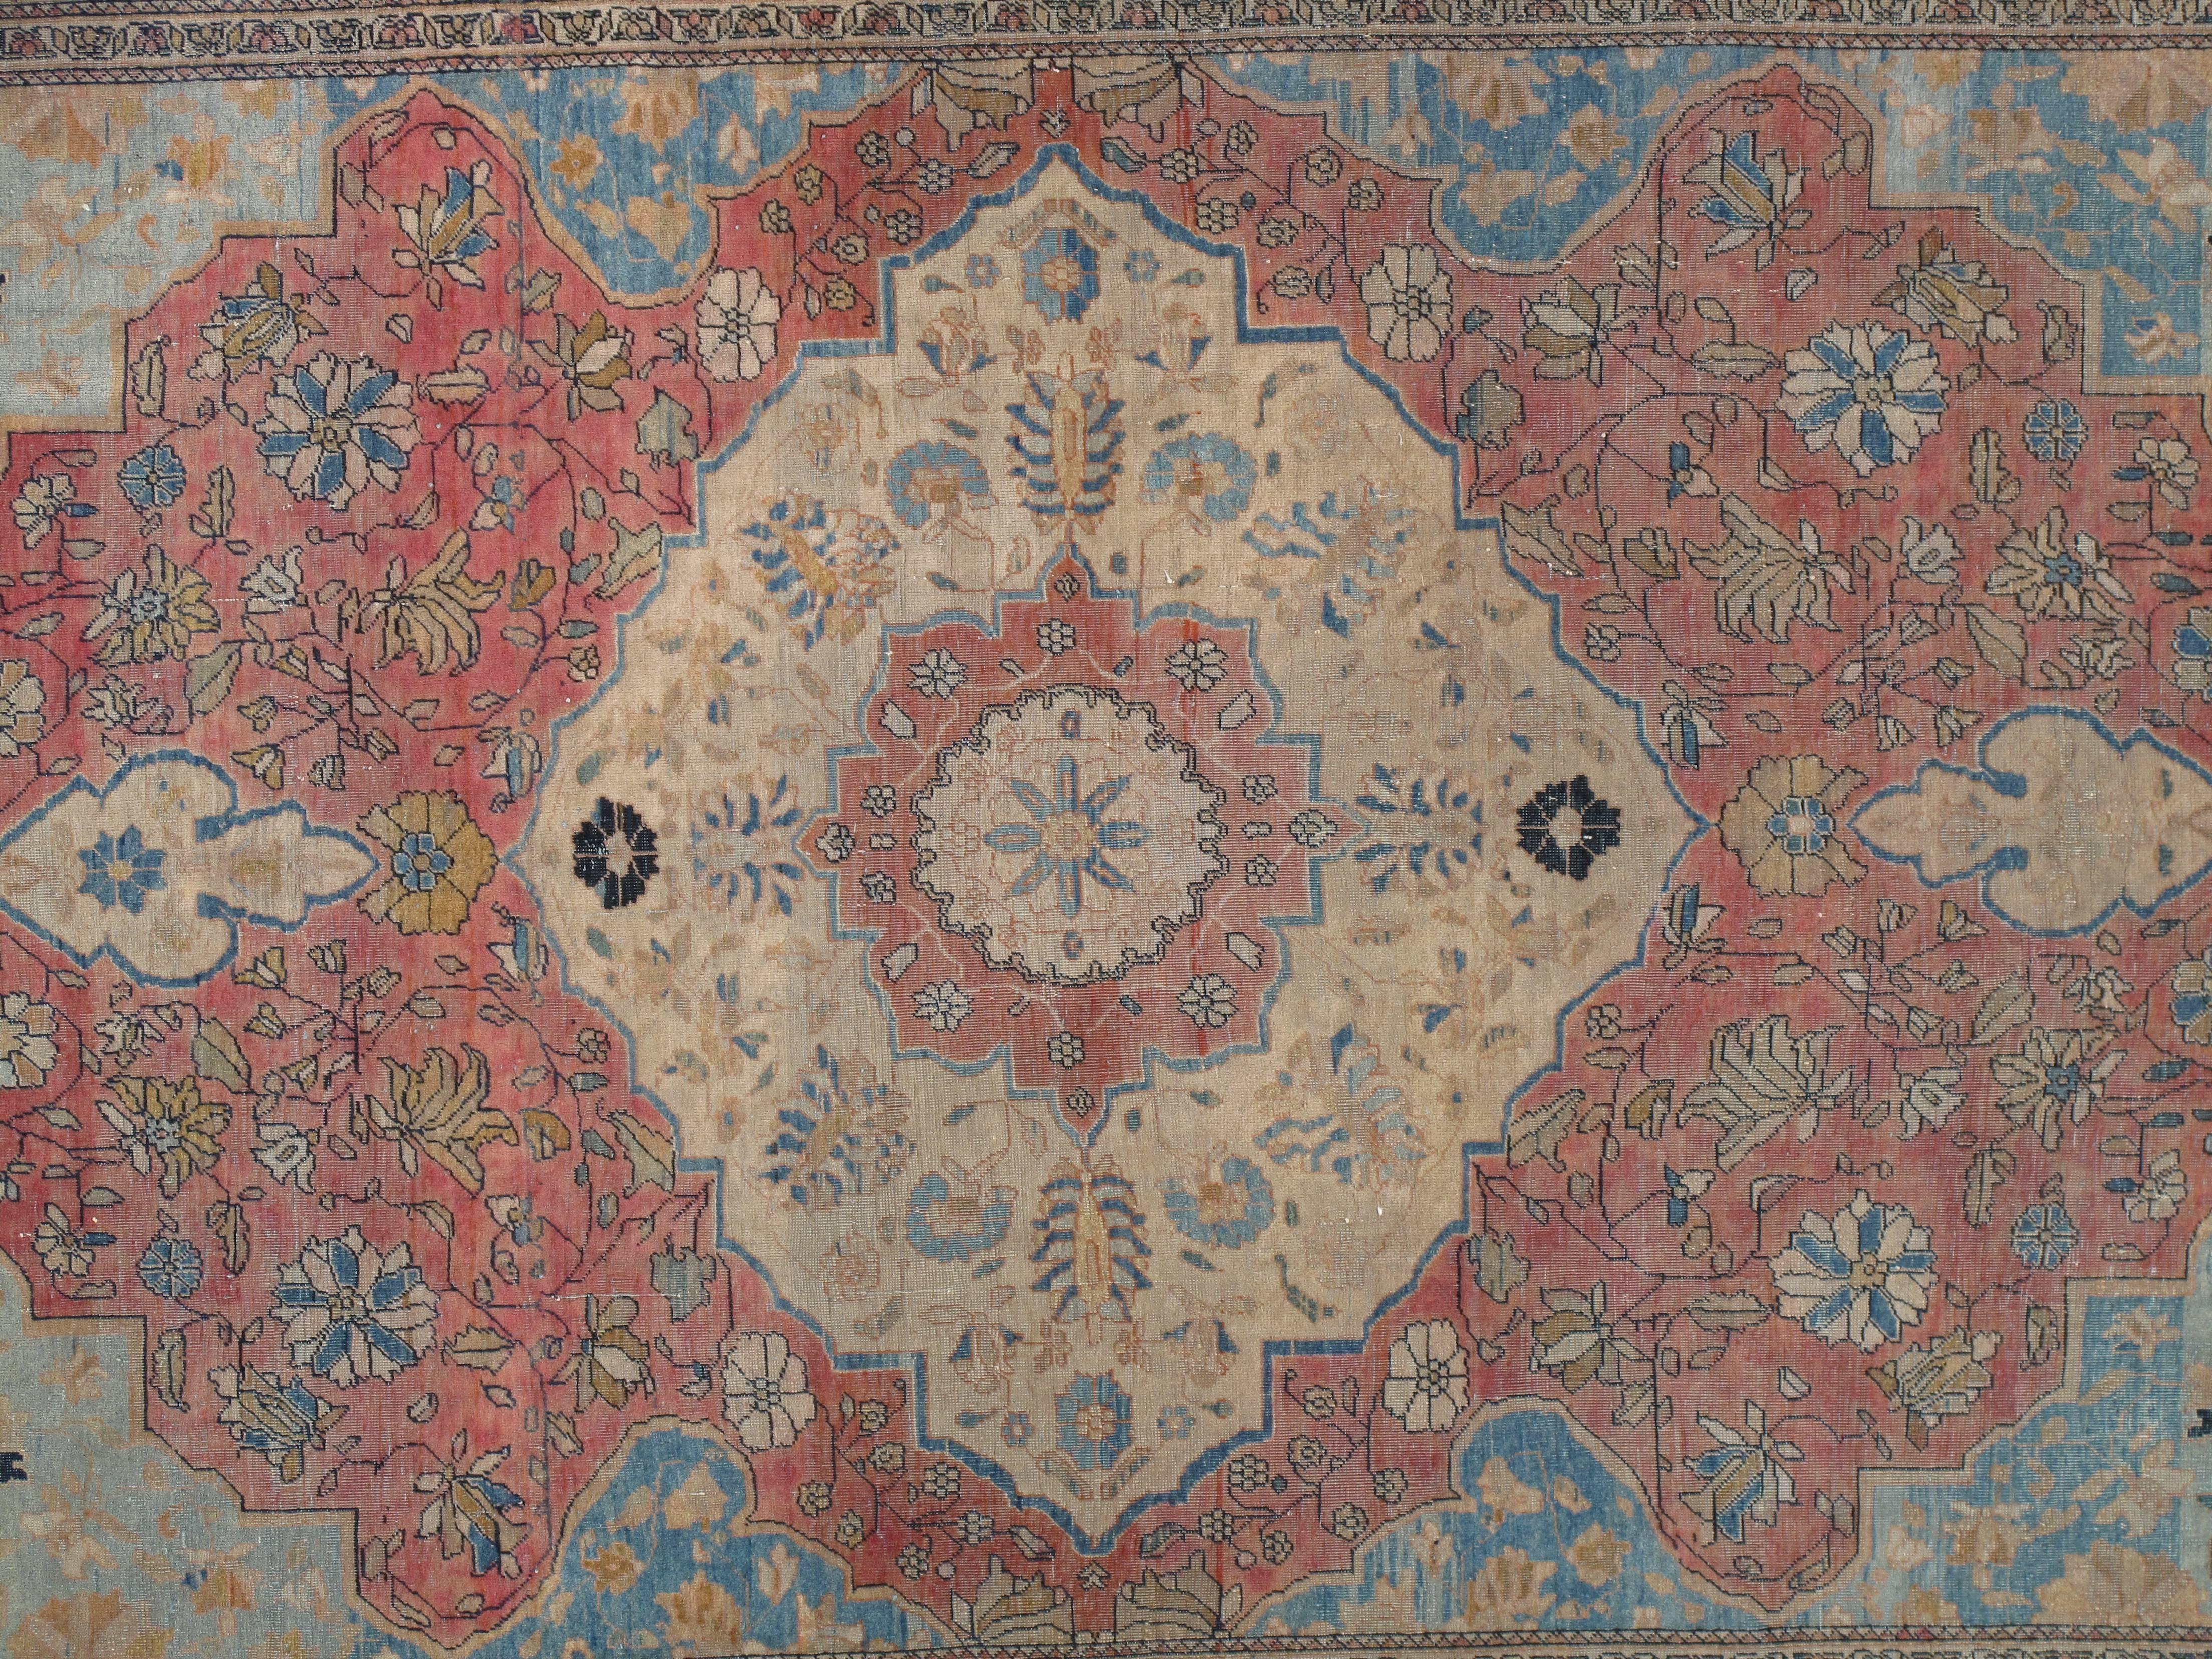 The best of Kashan’s from the late 19th and early 20th centuries are referred to as Motasham Kashan’s. They are some of the most finely woven of all Persian rugs, characterized by a beautiful sheen. This is a very rare example.
Please contact us